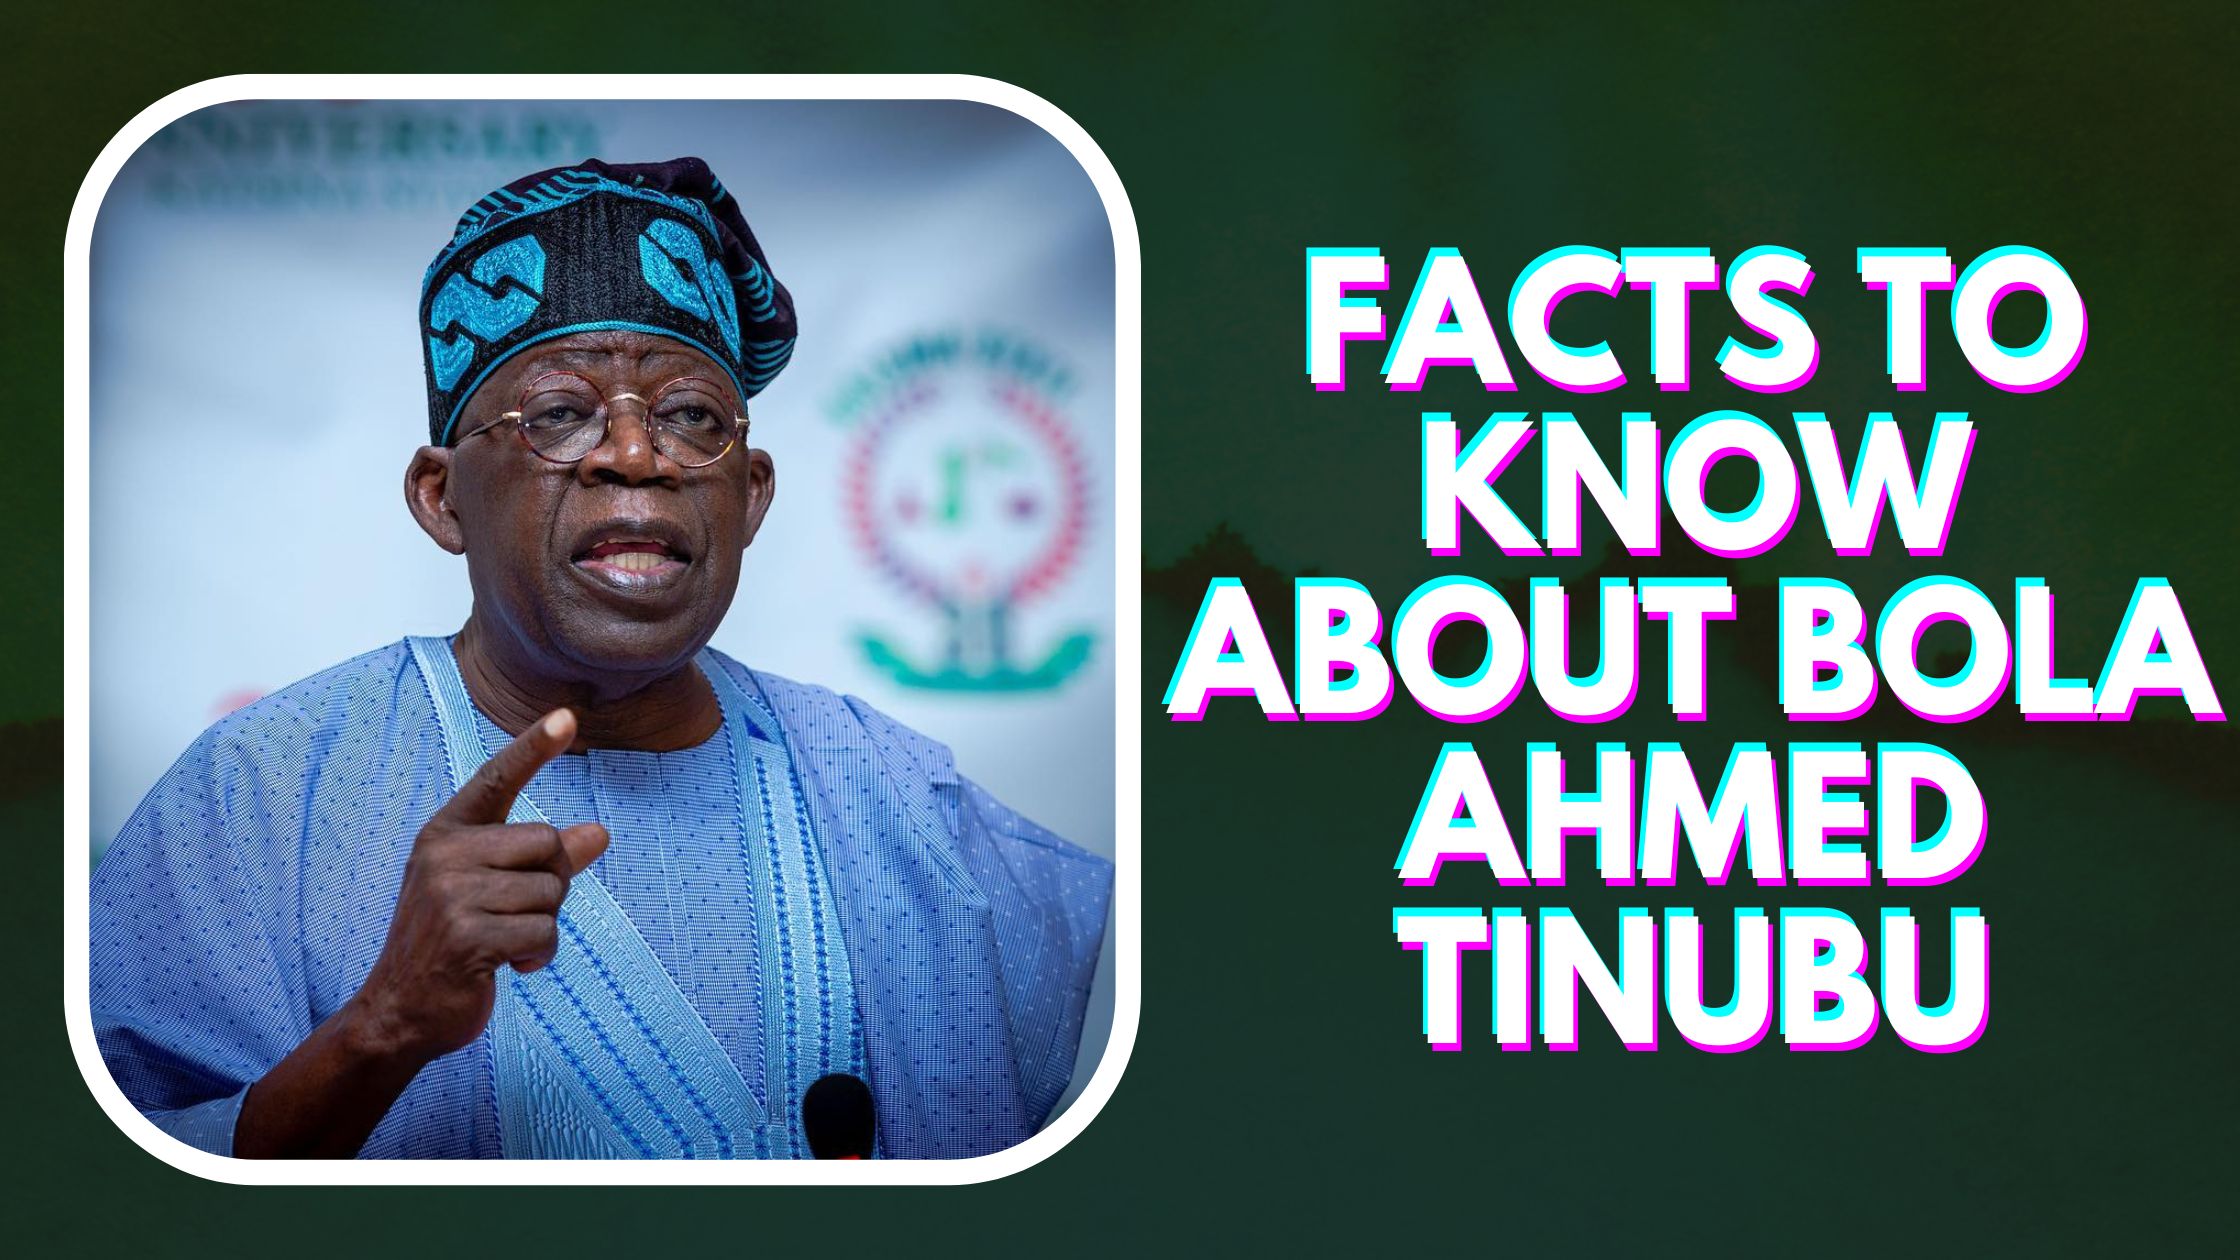 Facts To Know About Bola Ahmed Tinubu